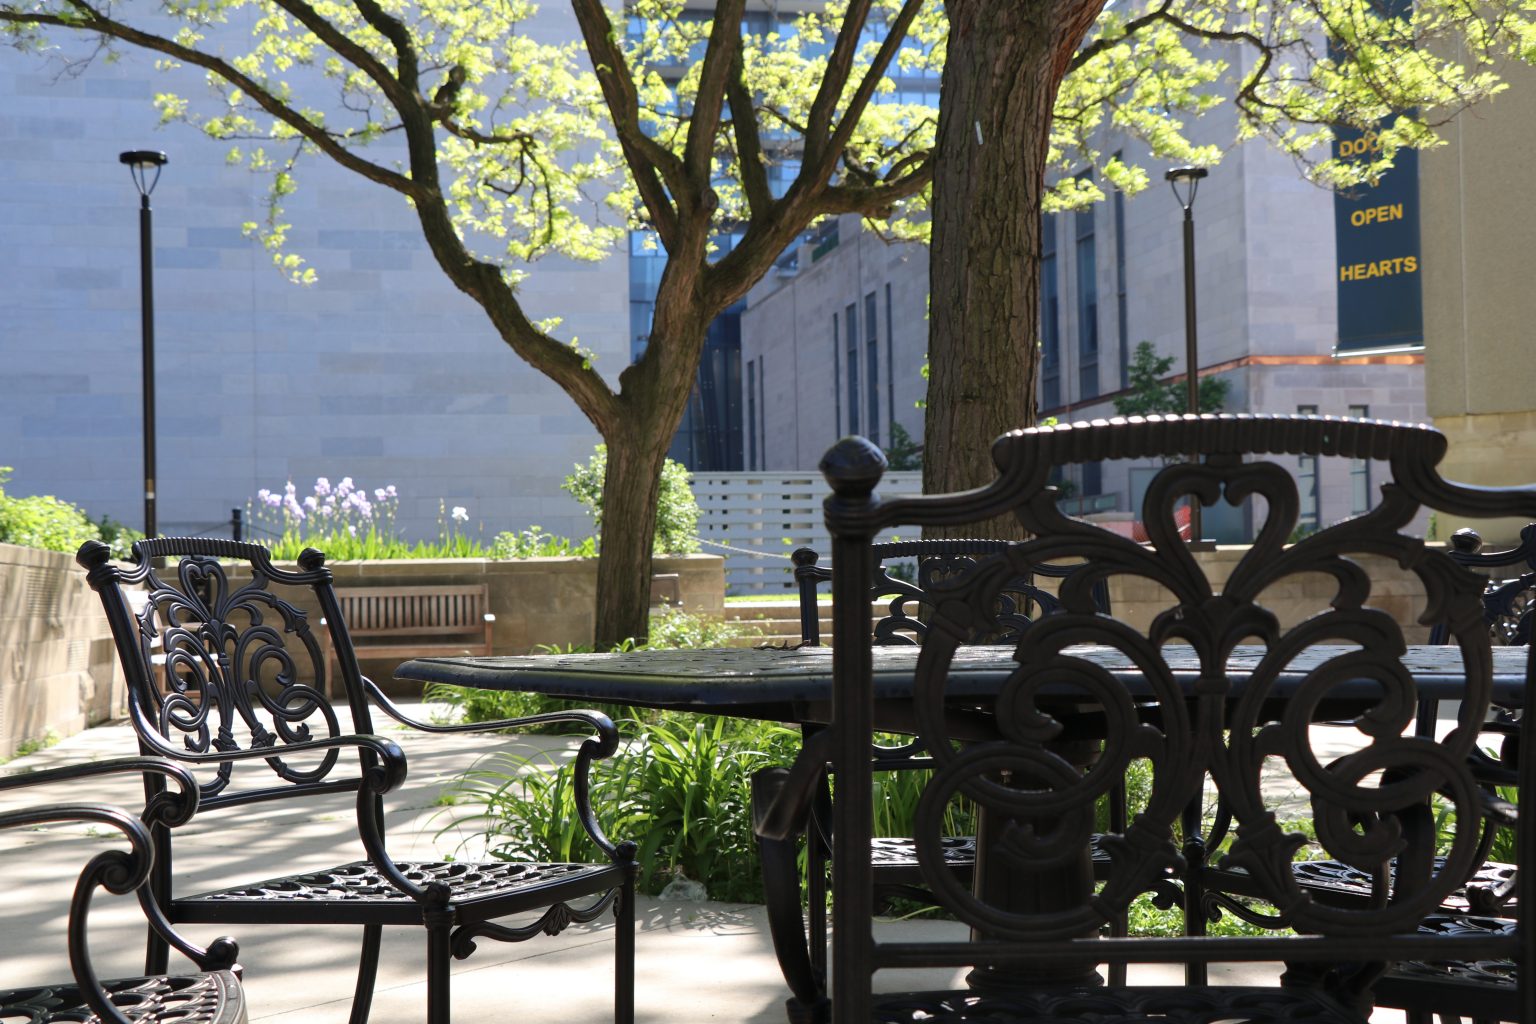 Low angle photograph of the wrought iron chairs and tables in the Brennan Hall Courtyard, with green trees and purple flowers in the background. A banner saying "Open Doors Open Hearts" is visible in the upper right corner.